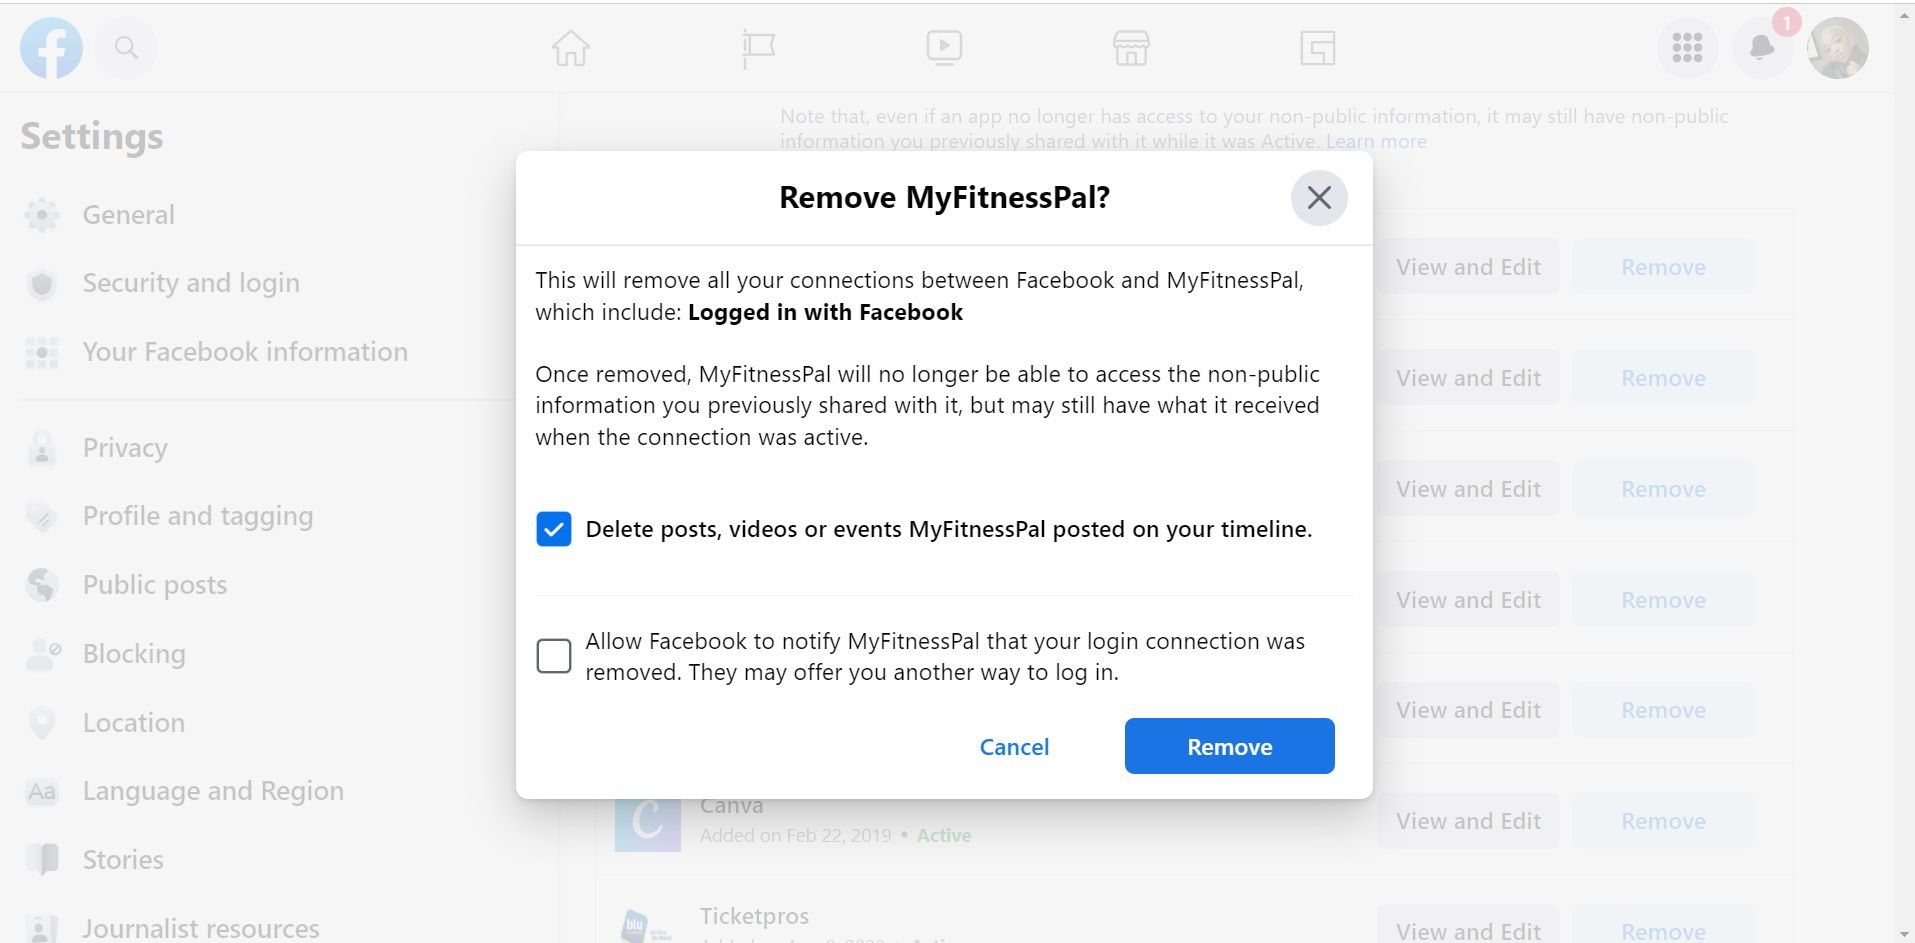 Removing an app connection on Facebook